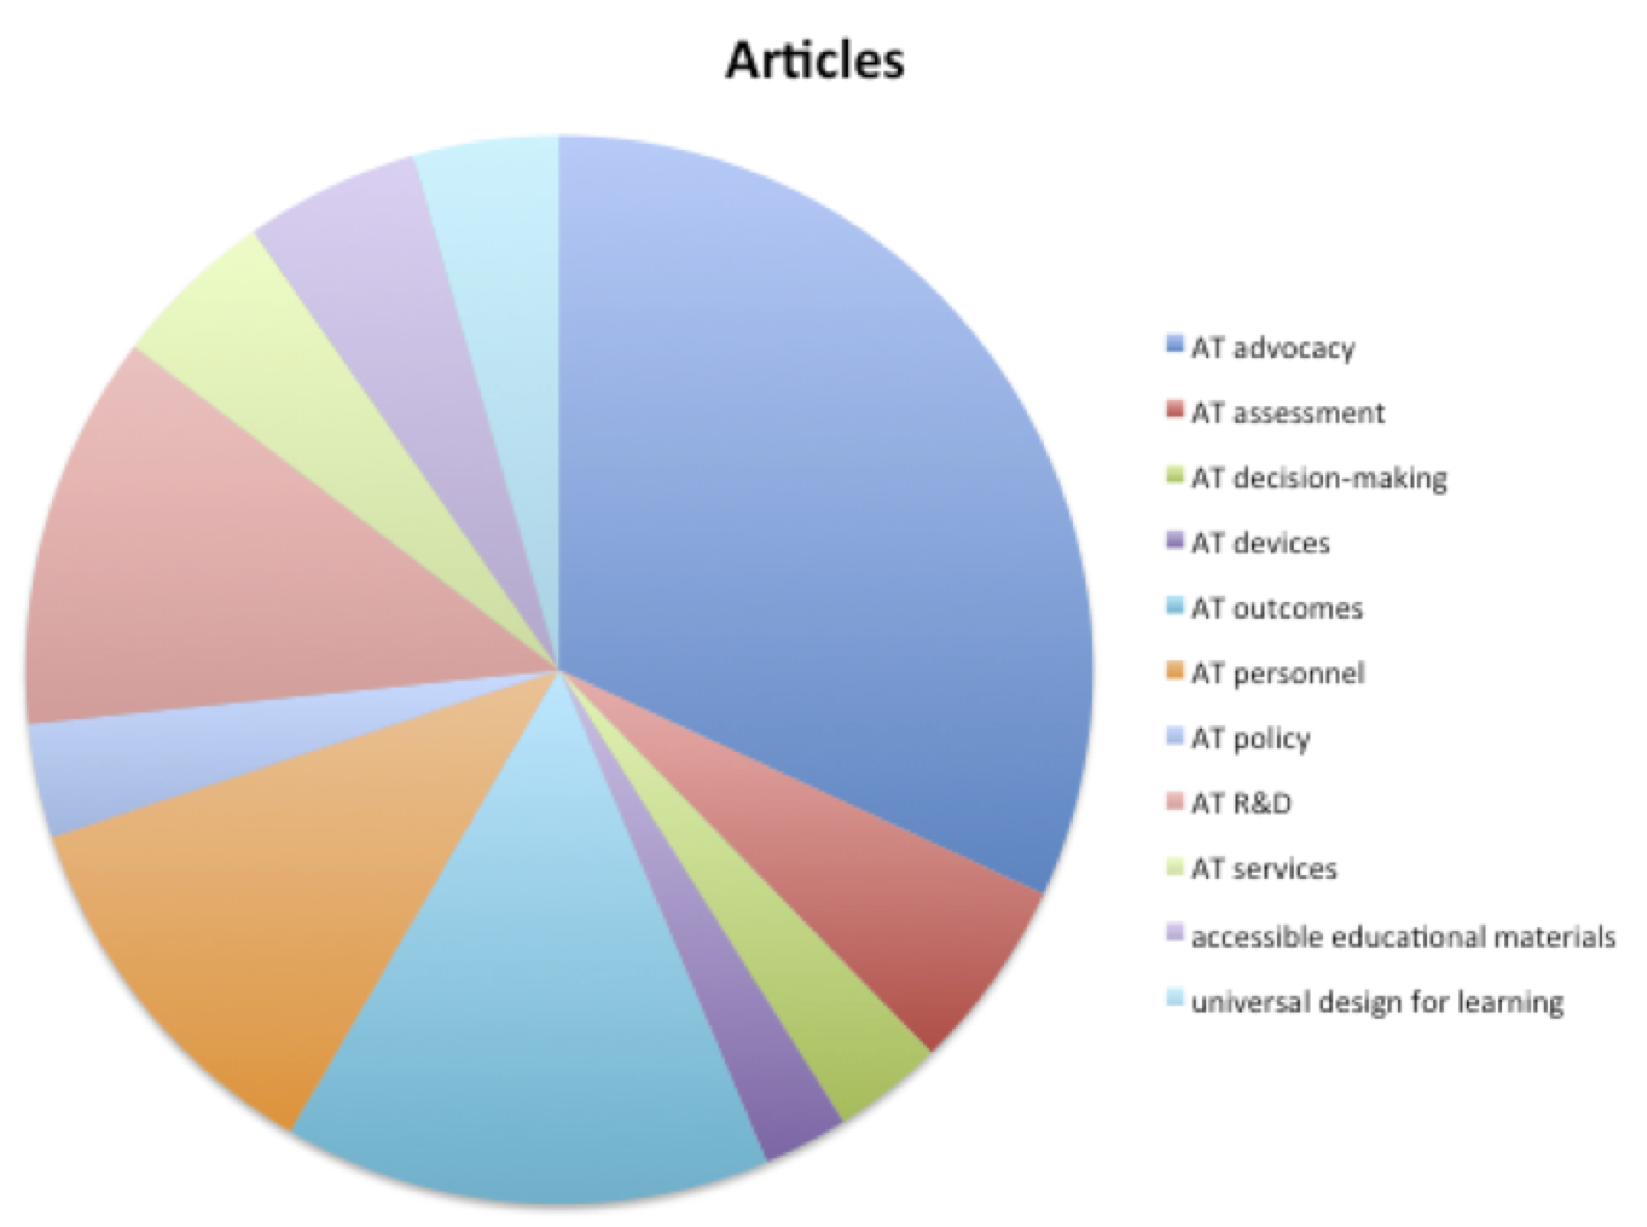 A pie chart illustrating the number of articles found by AT construct.